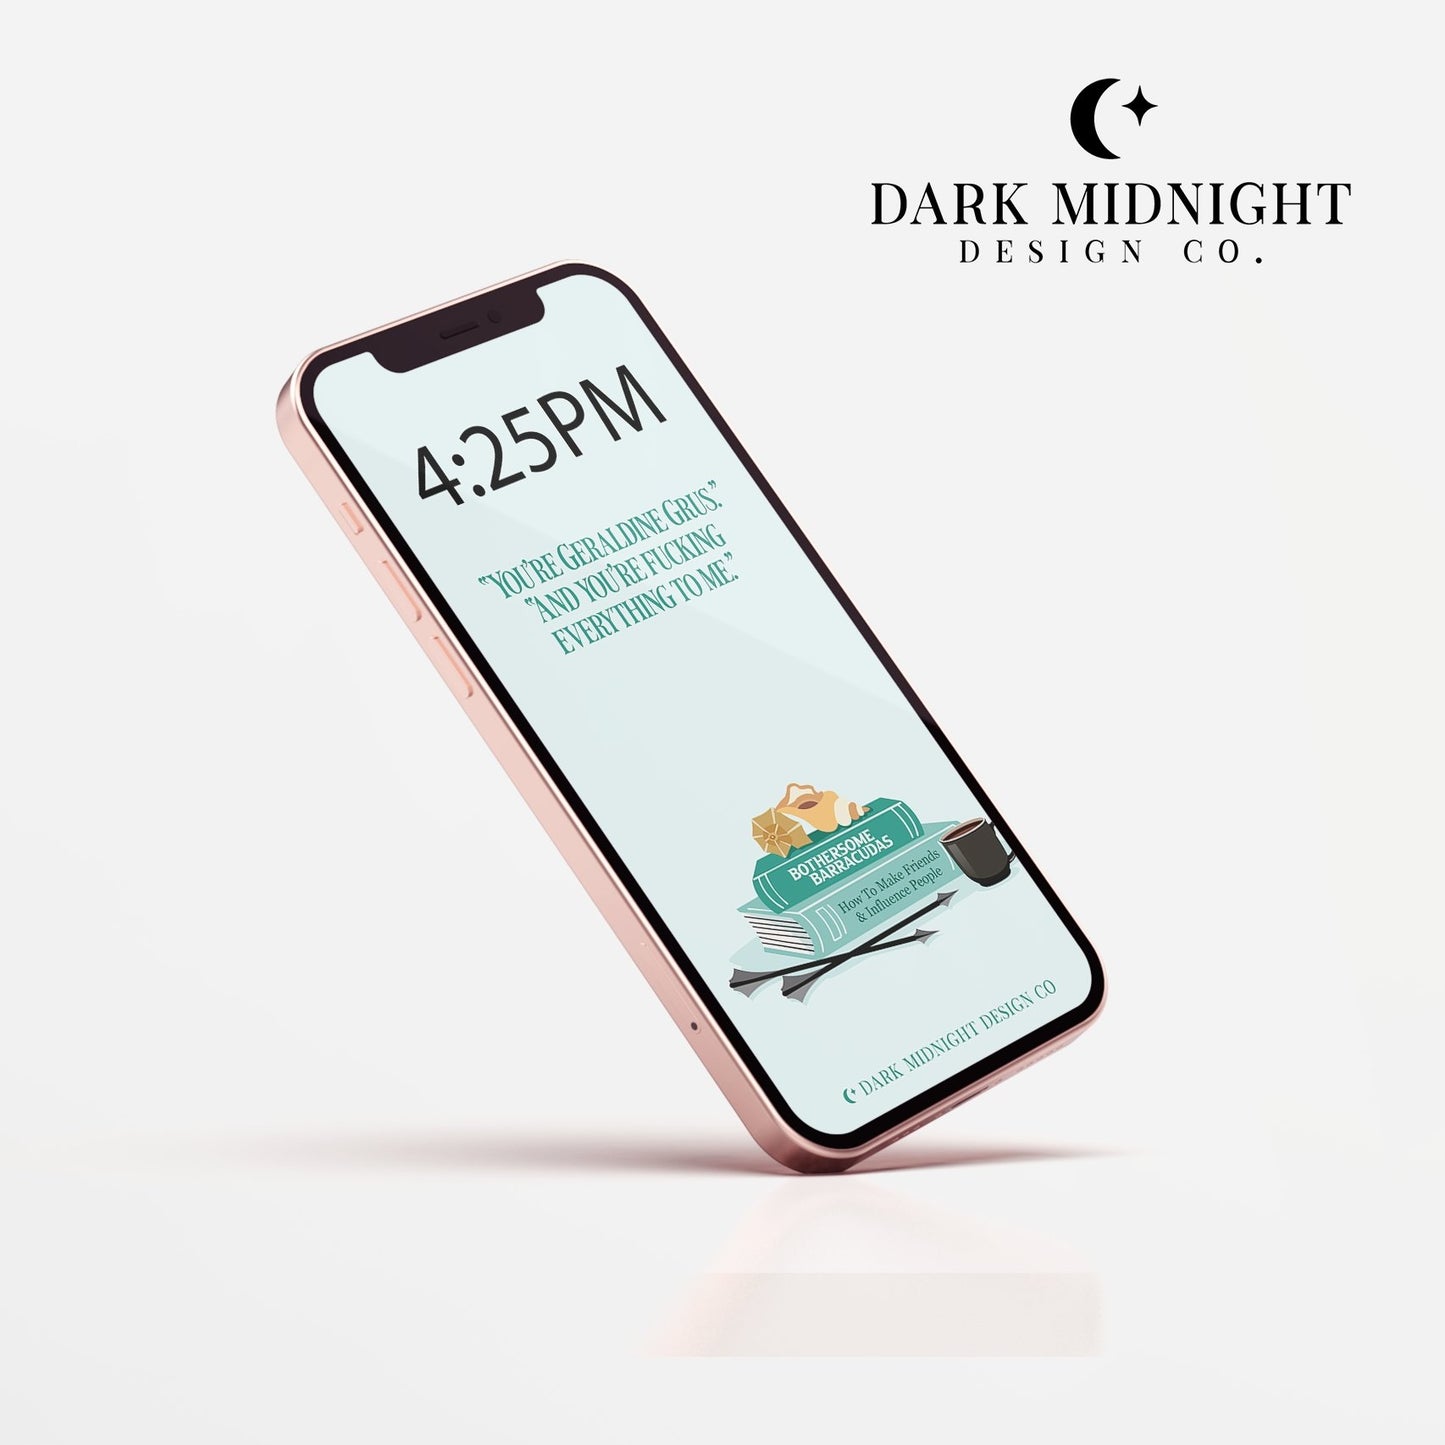 Character Anthology Phone Wallpaper - Max Rigel - Officially Licensed Zodiac Academy Phone Wallpaper - Dark Midnight Design Co